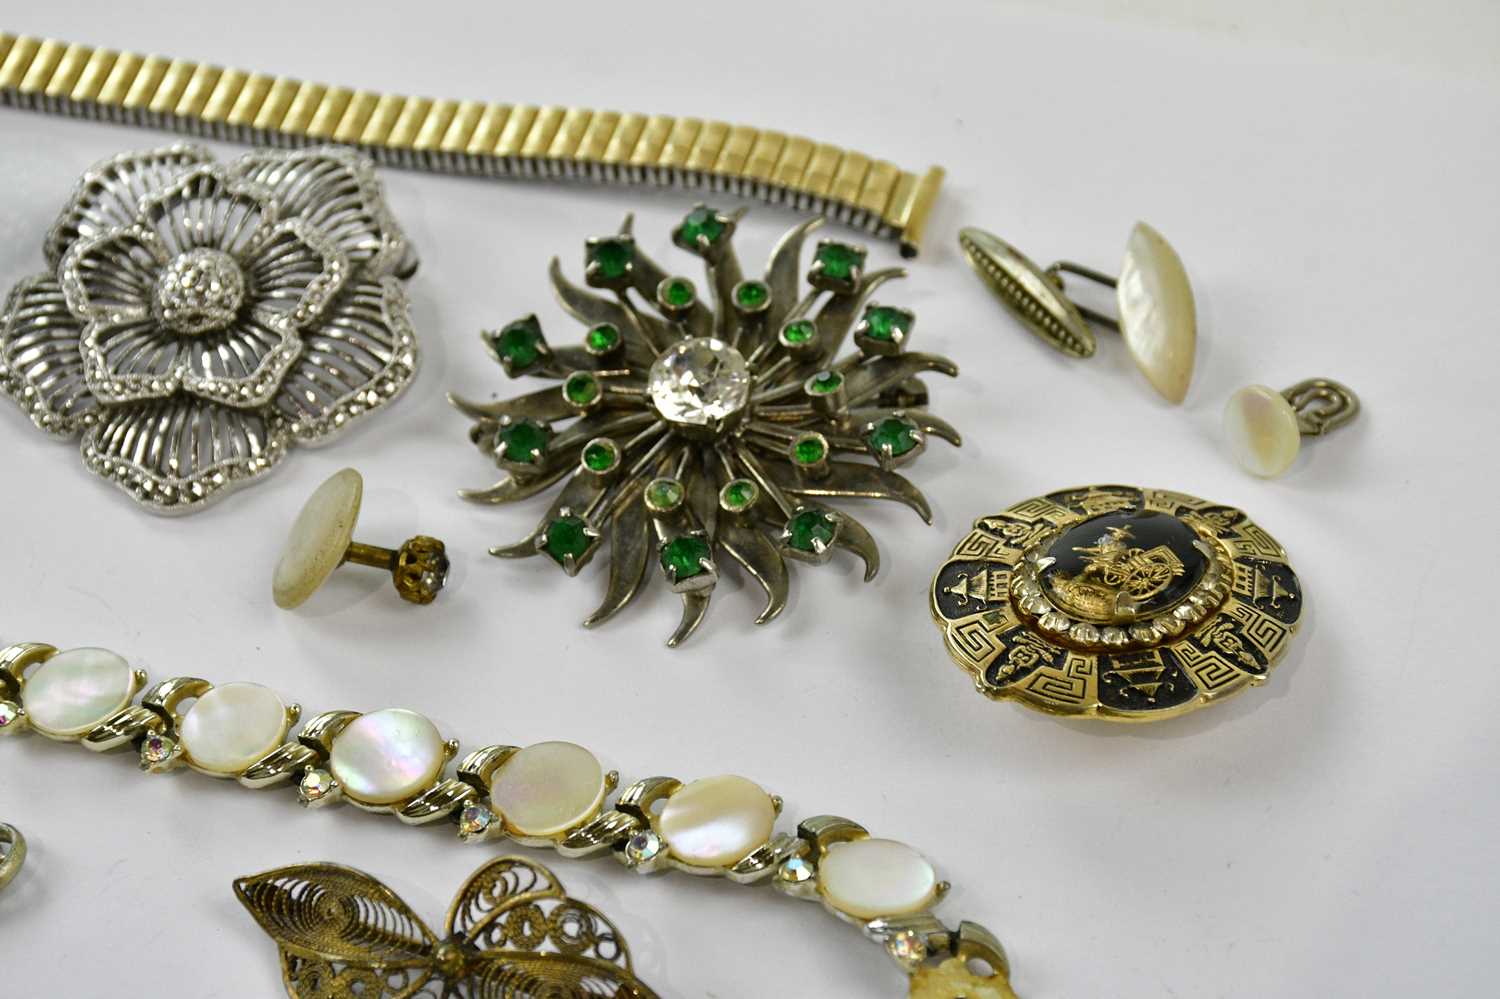 A small group of costume jewellery including filigree butterfly or insect brooch, stylish floral - Bild 3 aus 5